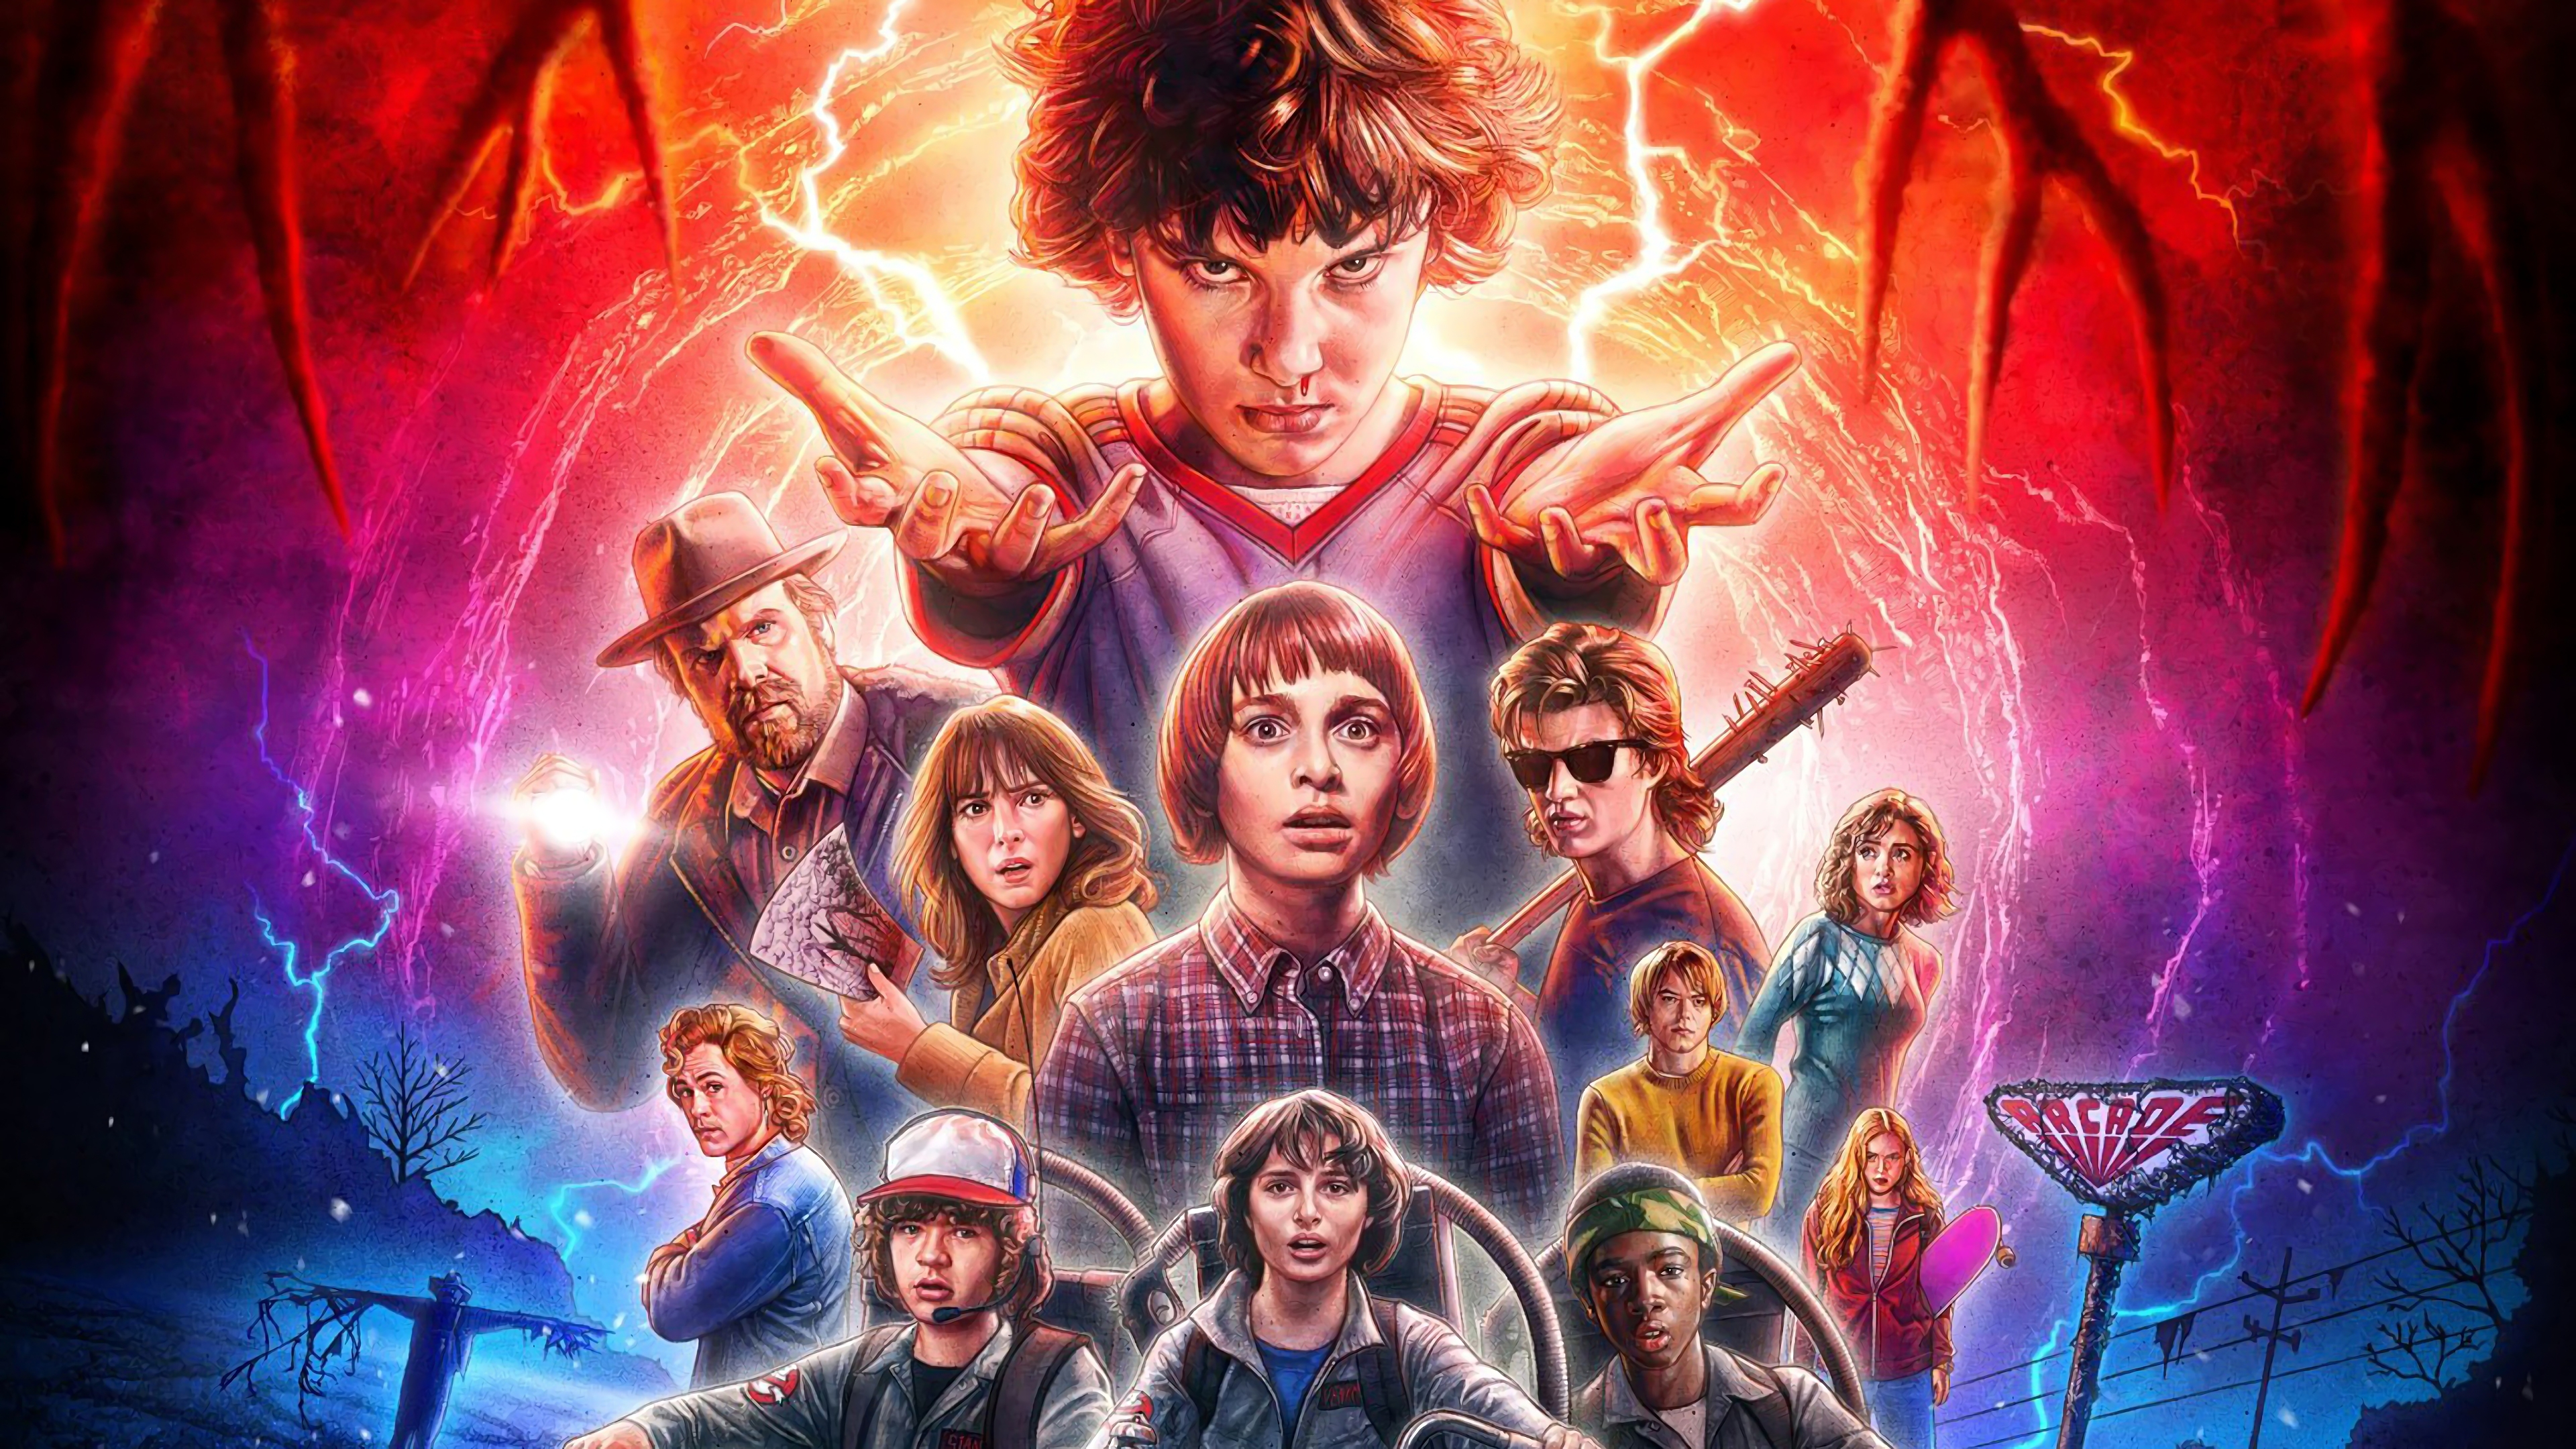 3840x2160 80+ 4K Stranger Things Wallpapers | Background Images